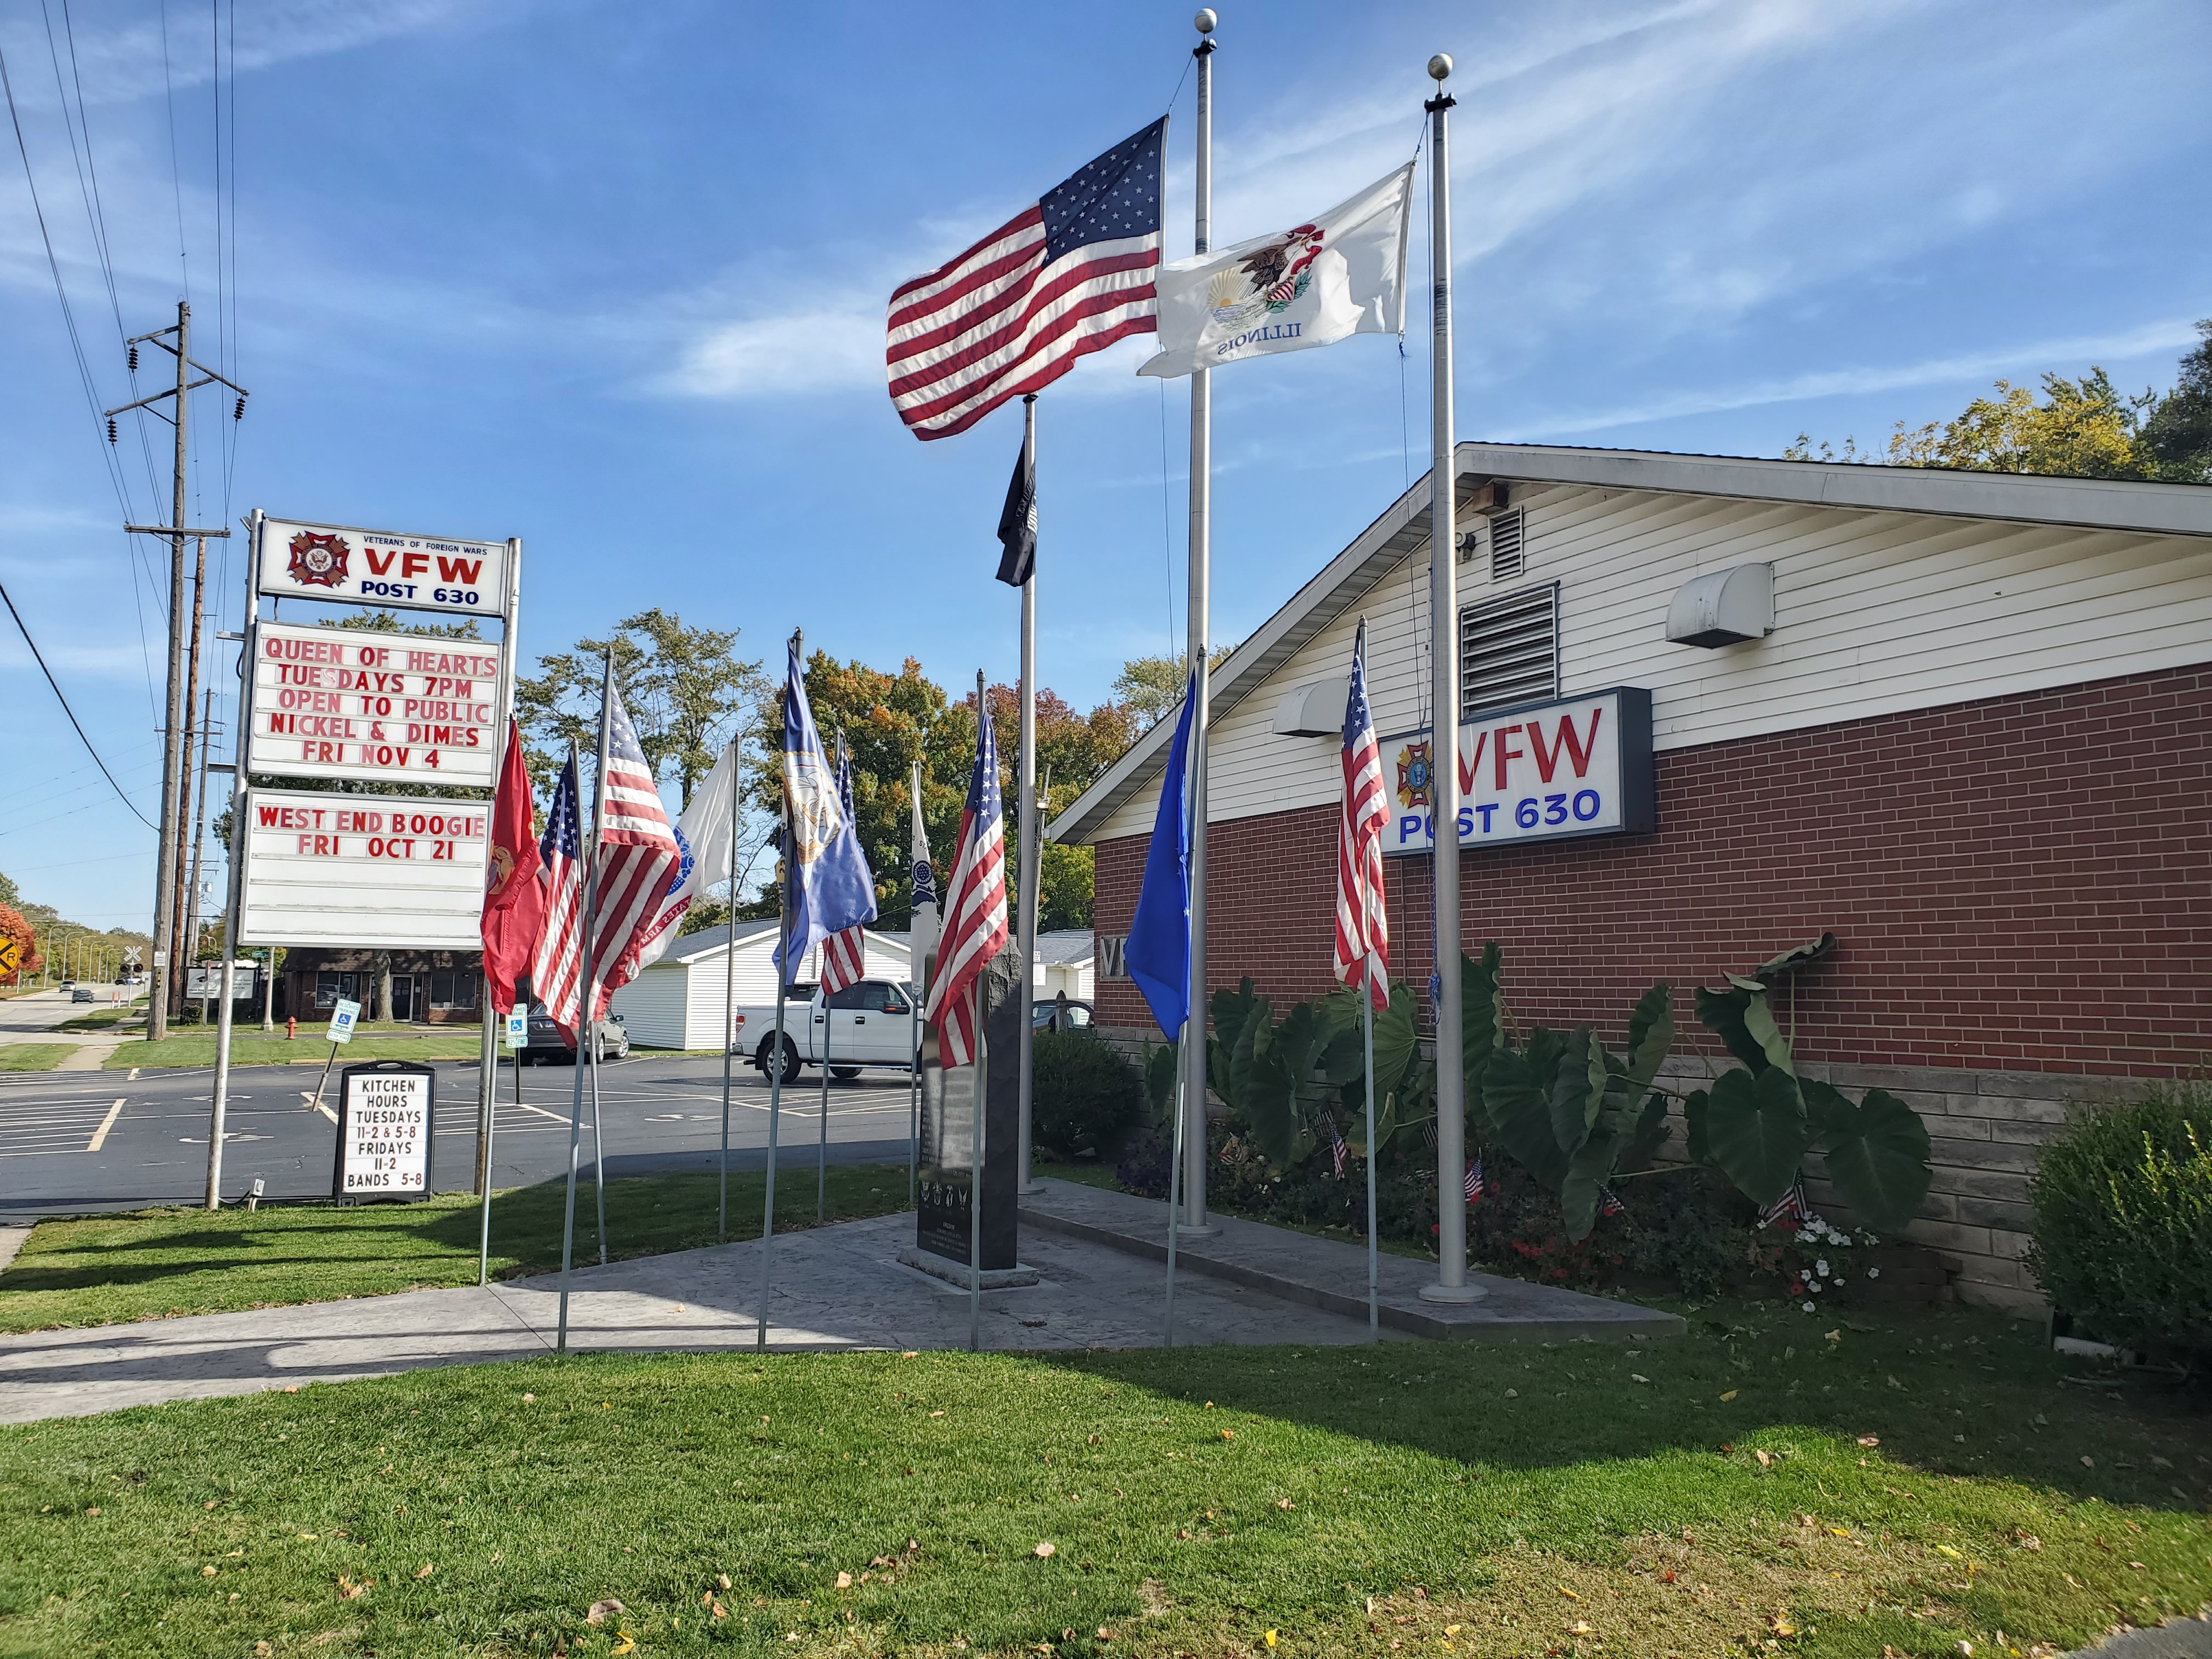 The exterior of VFW Post 630. Photo by Carl Busch.